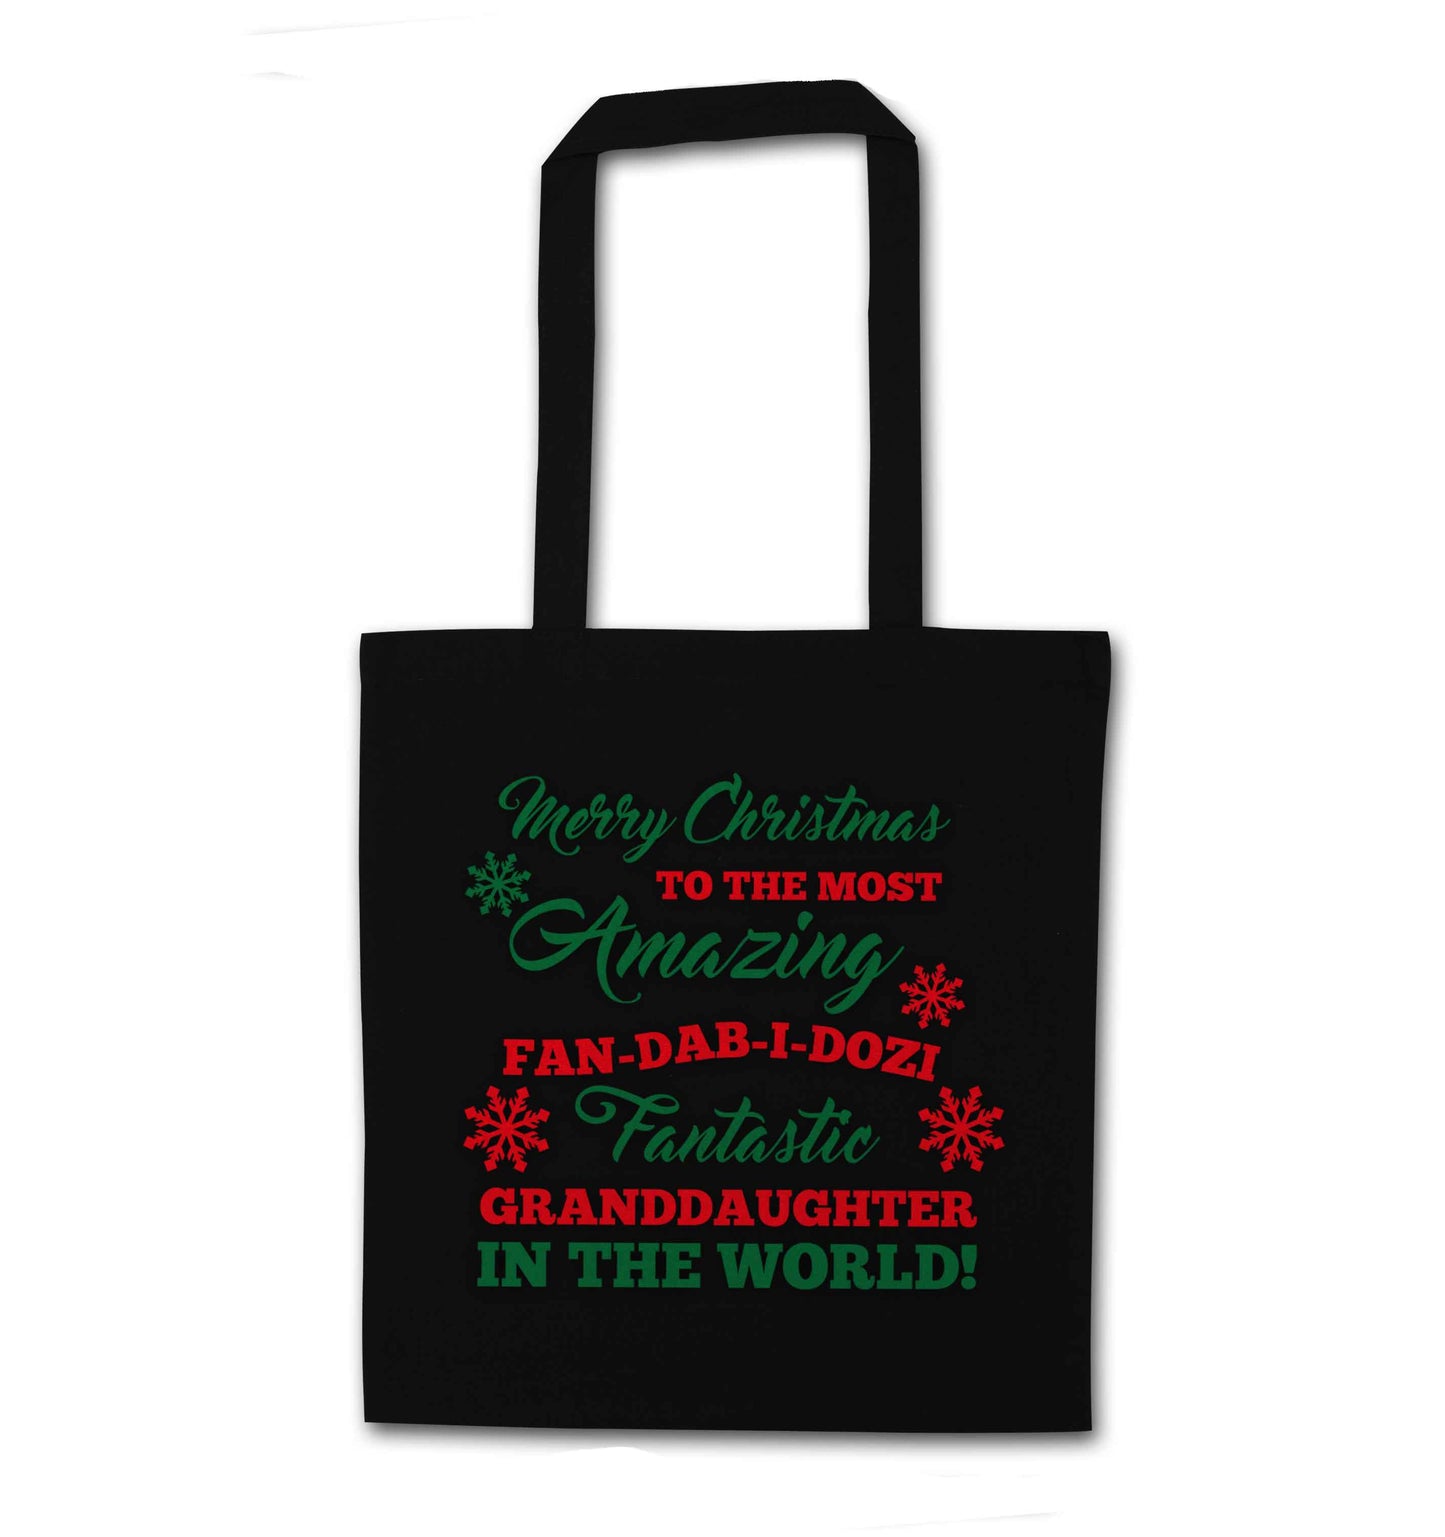 Merry Christmas to the most amazing fan-dab-i-dozi fantasic Granddaughter in the world black tote bag